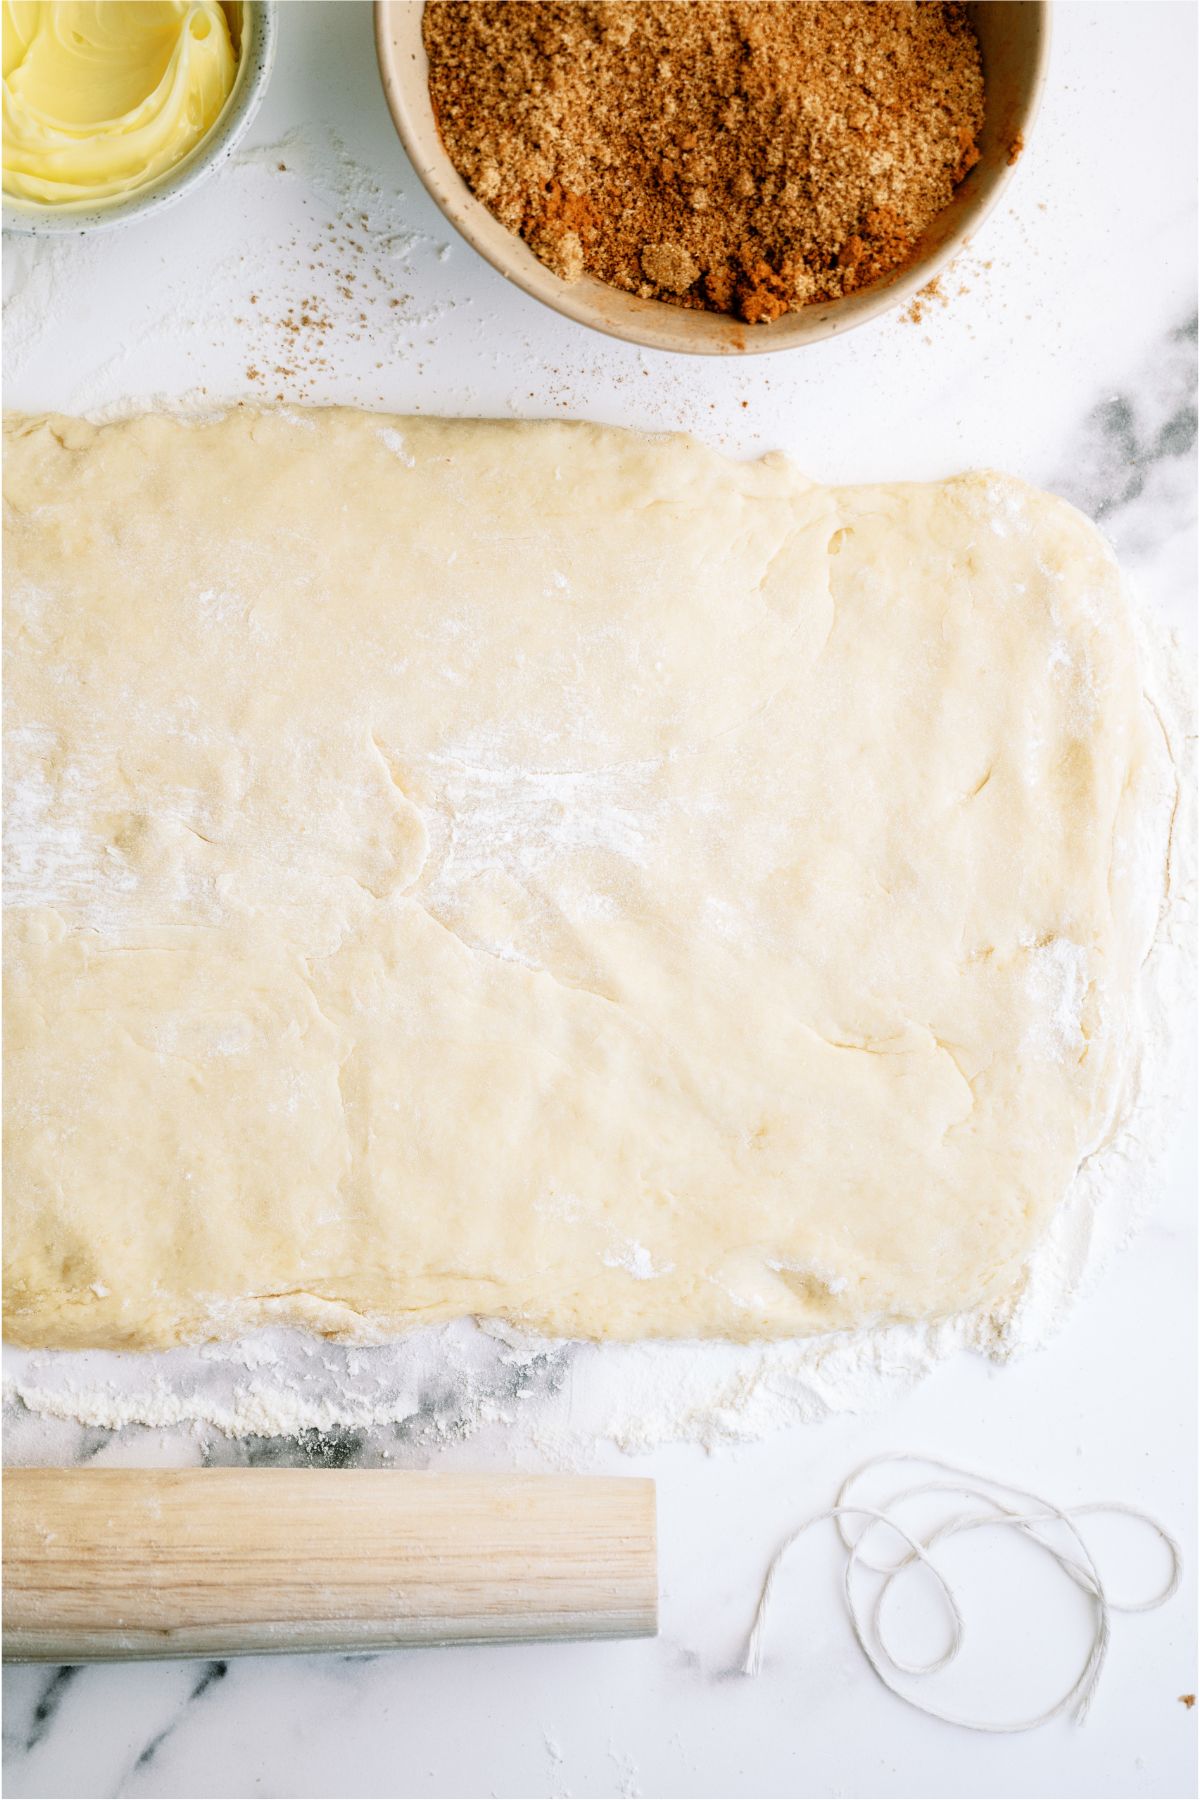 The BEST Homemade Cinnamon Rolls
dough rolled out into a rectangle